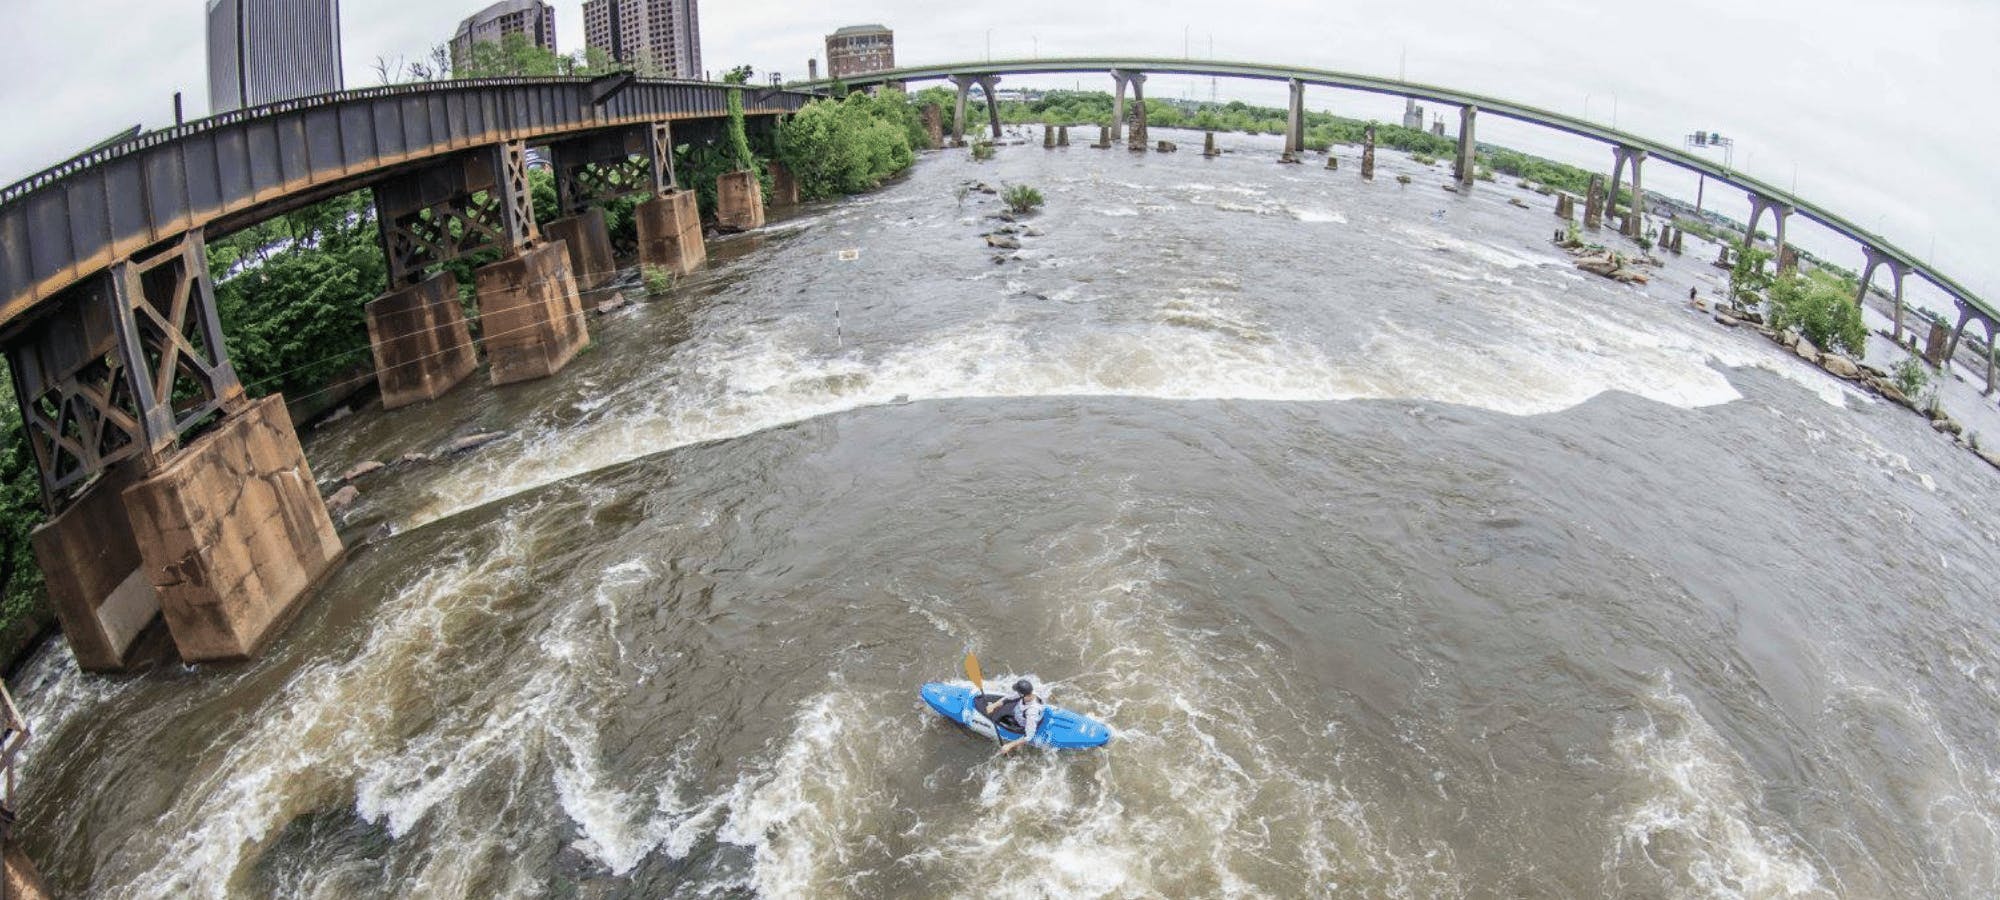 Kayaking on the James River in Downtown Richmond